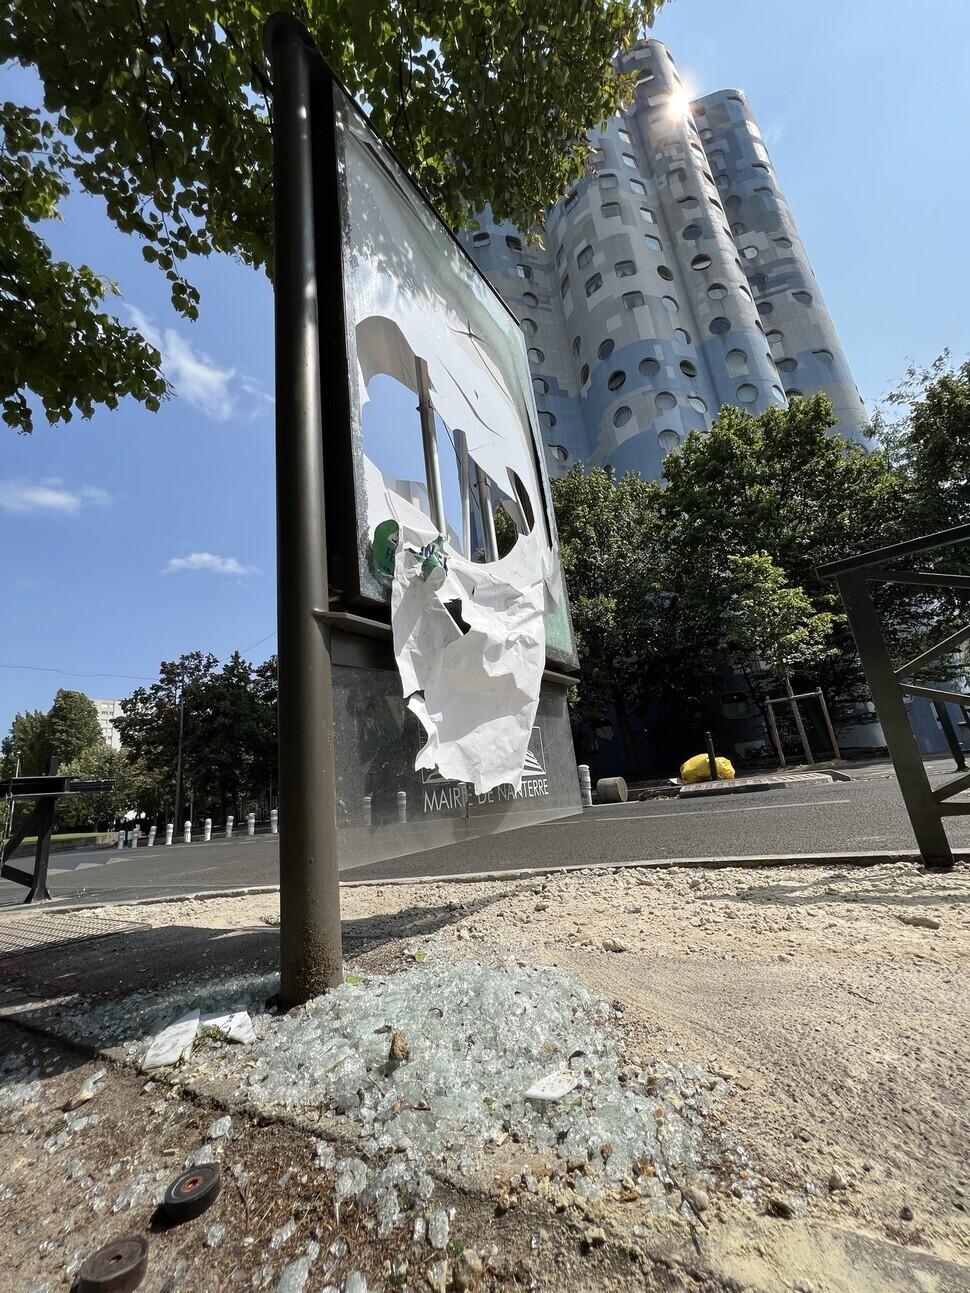 Glass panes on a bus stop in Nanterre have been shattered, with shards of glass still littering the ground on July 3. (Noh Ji-won/The Hankyoreh)